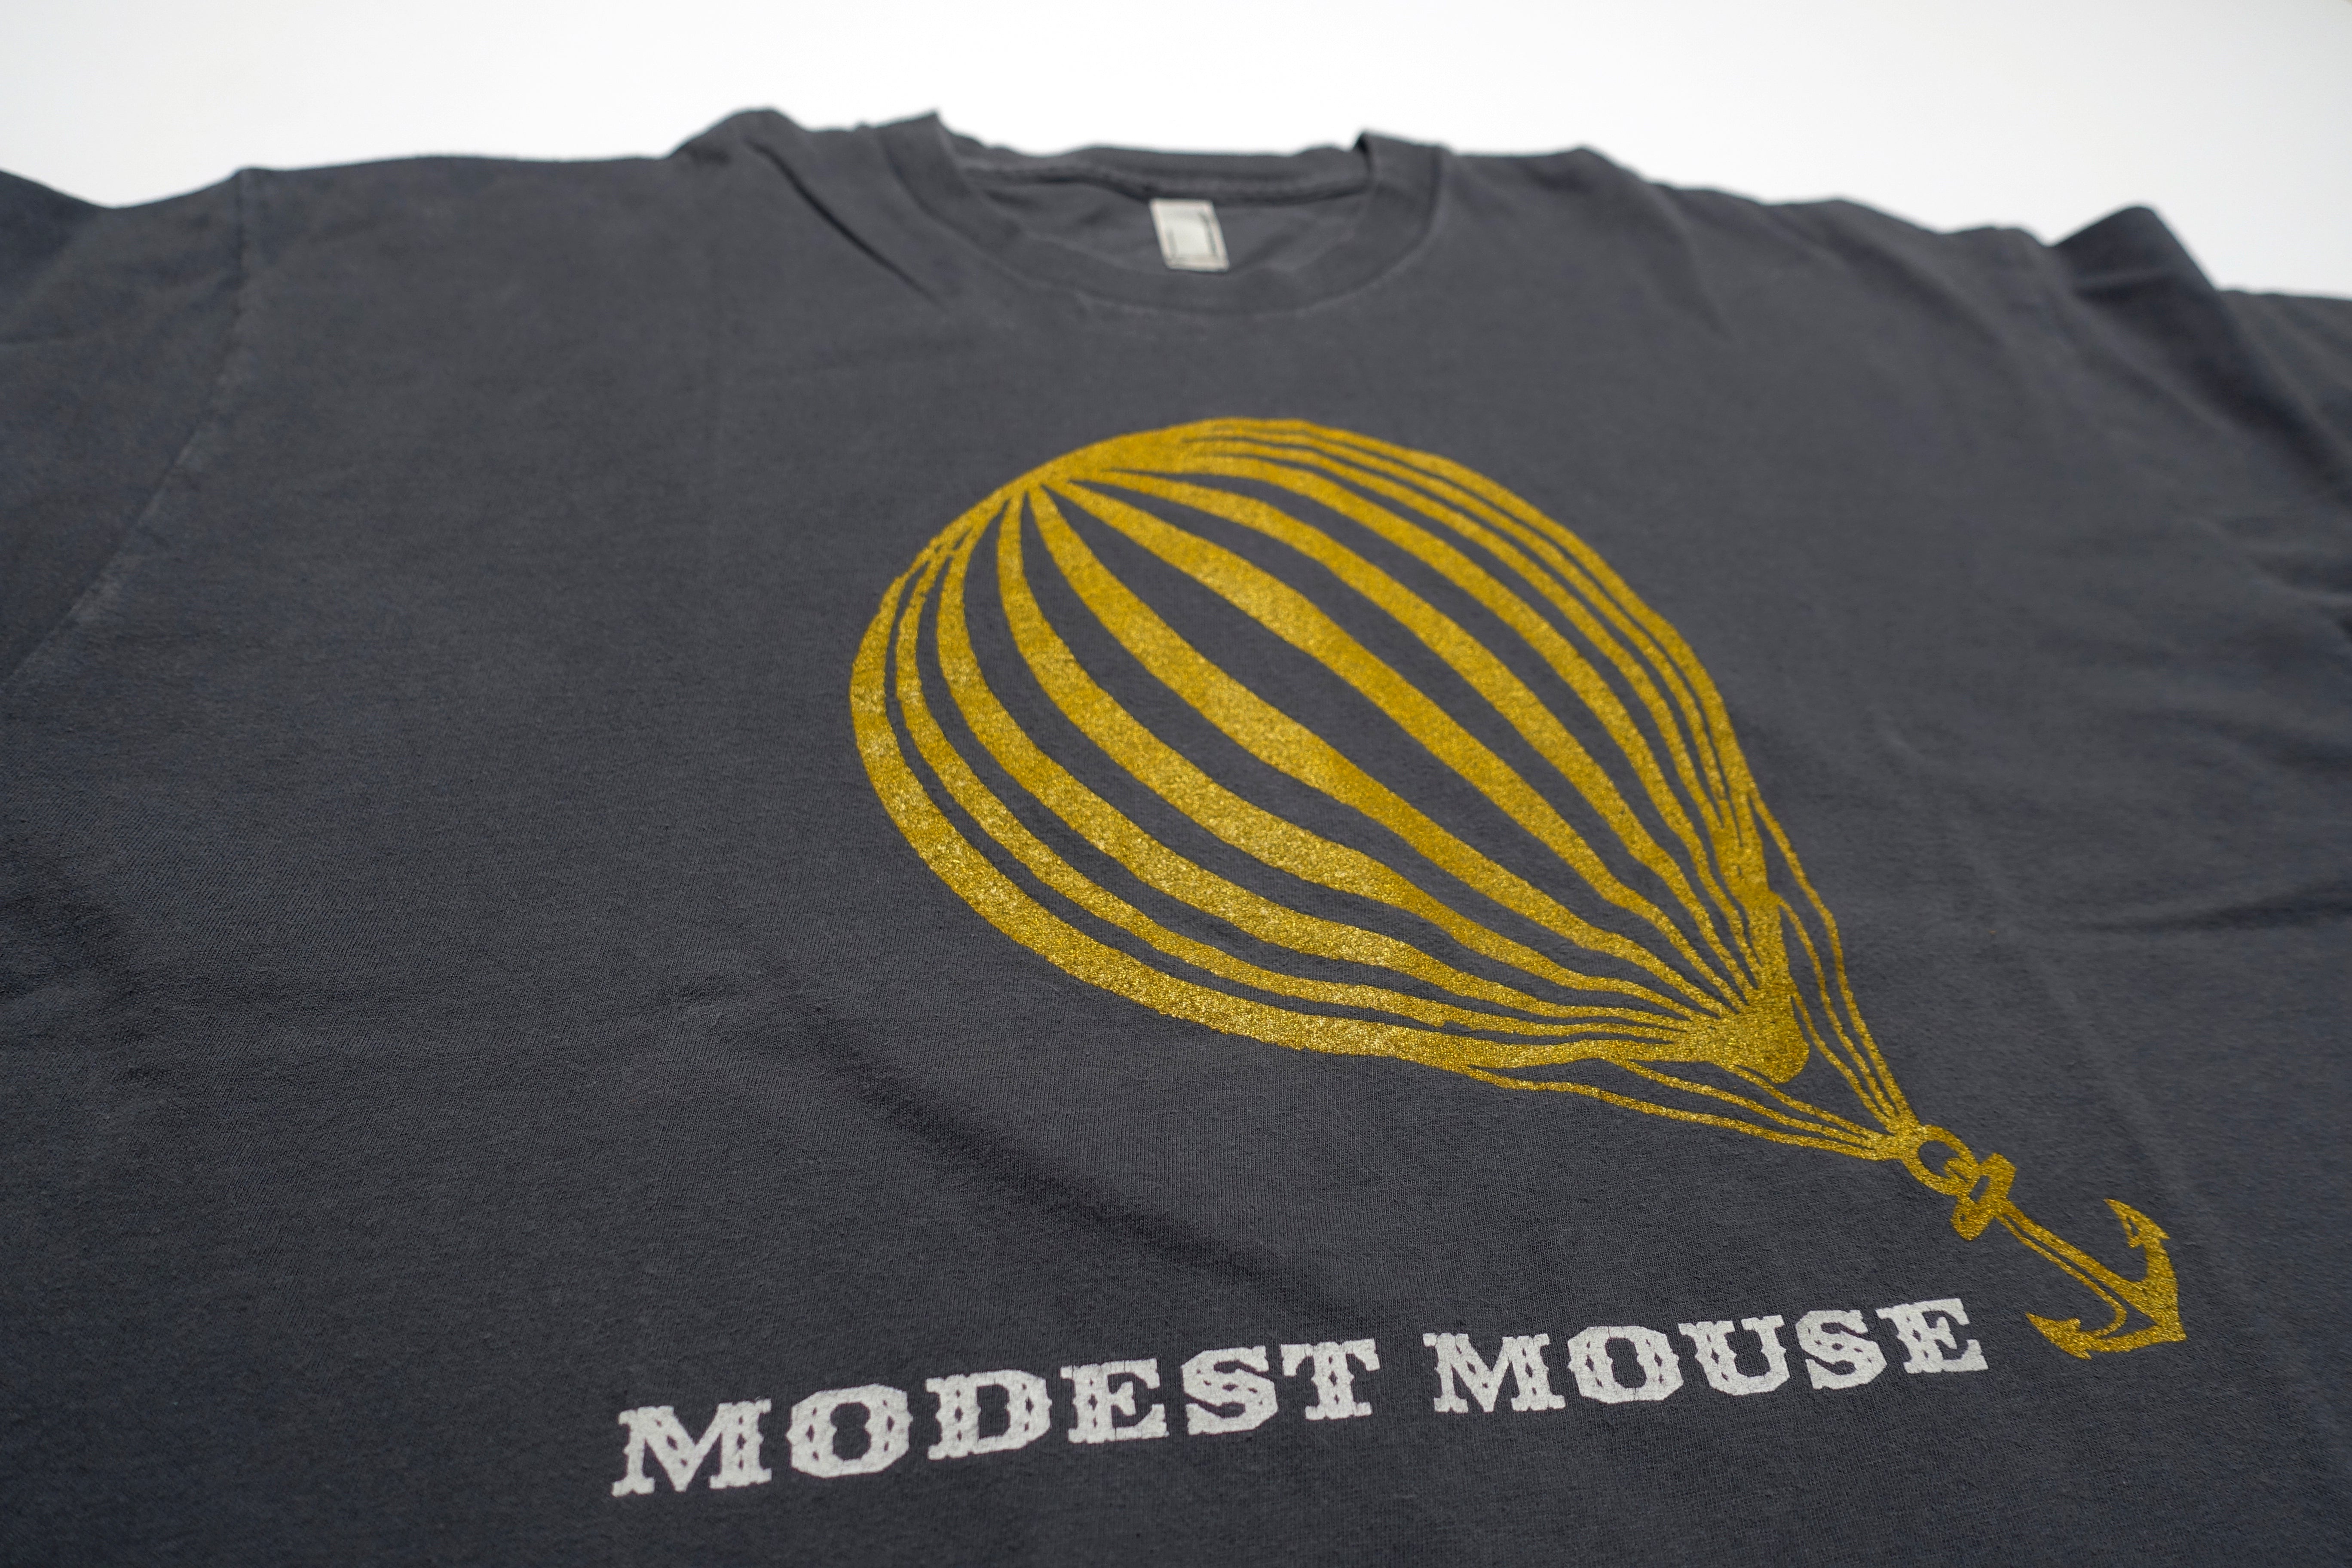 Modest Mouse - Missed the Boat 2007 Tour Charcoal Grey Shirt Size XL